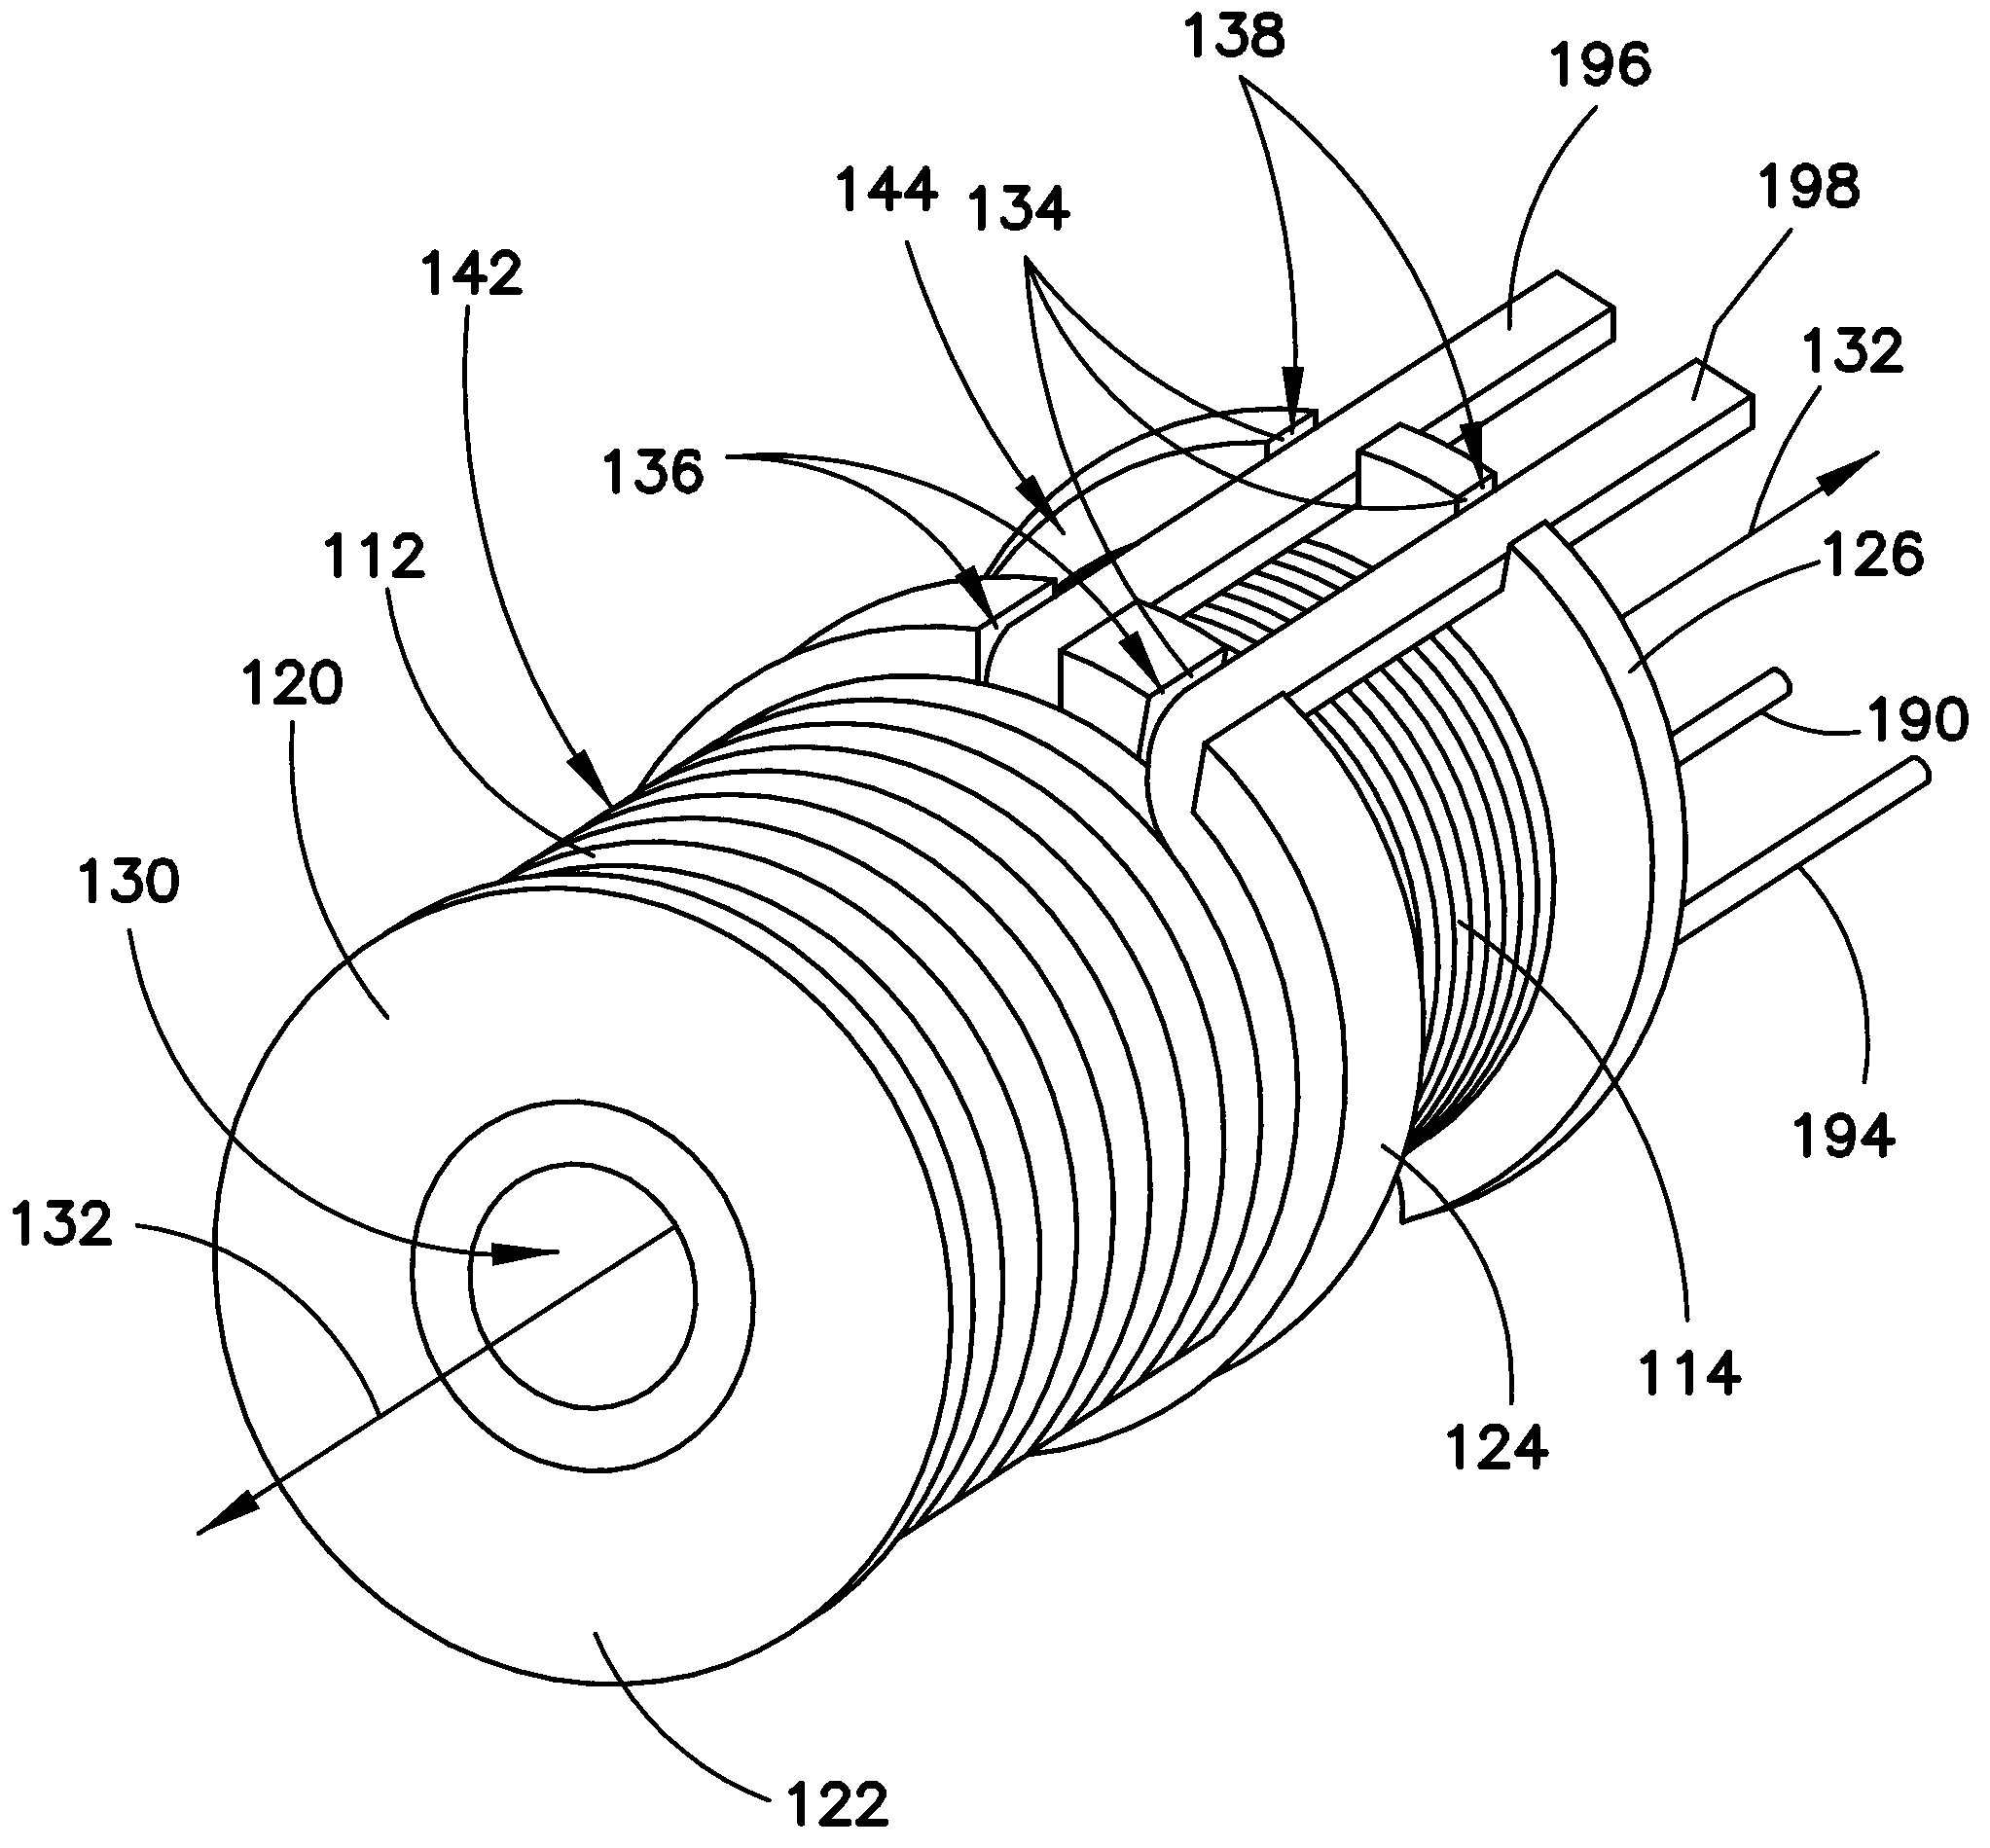 Starter solenoid with spool for retaining coils